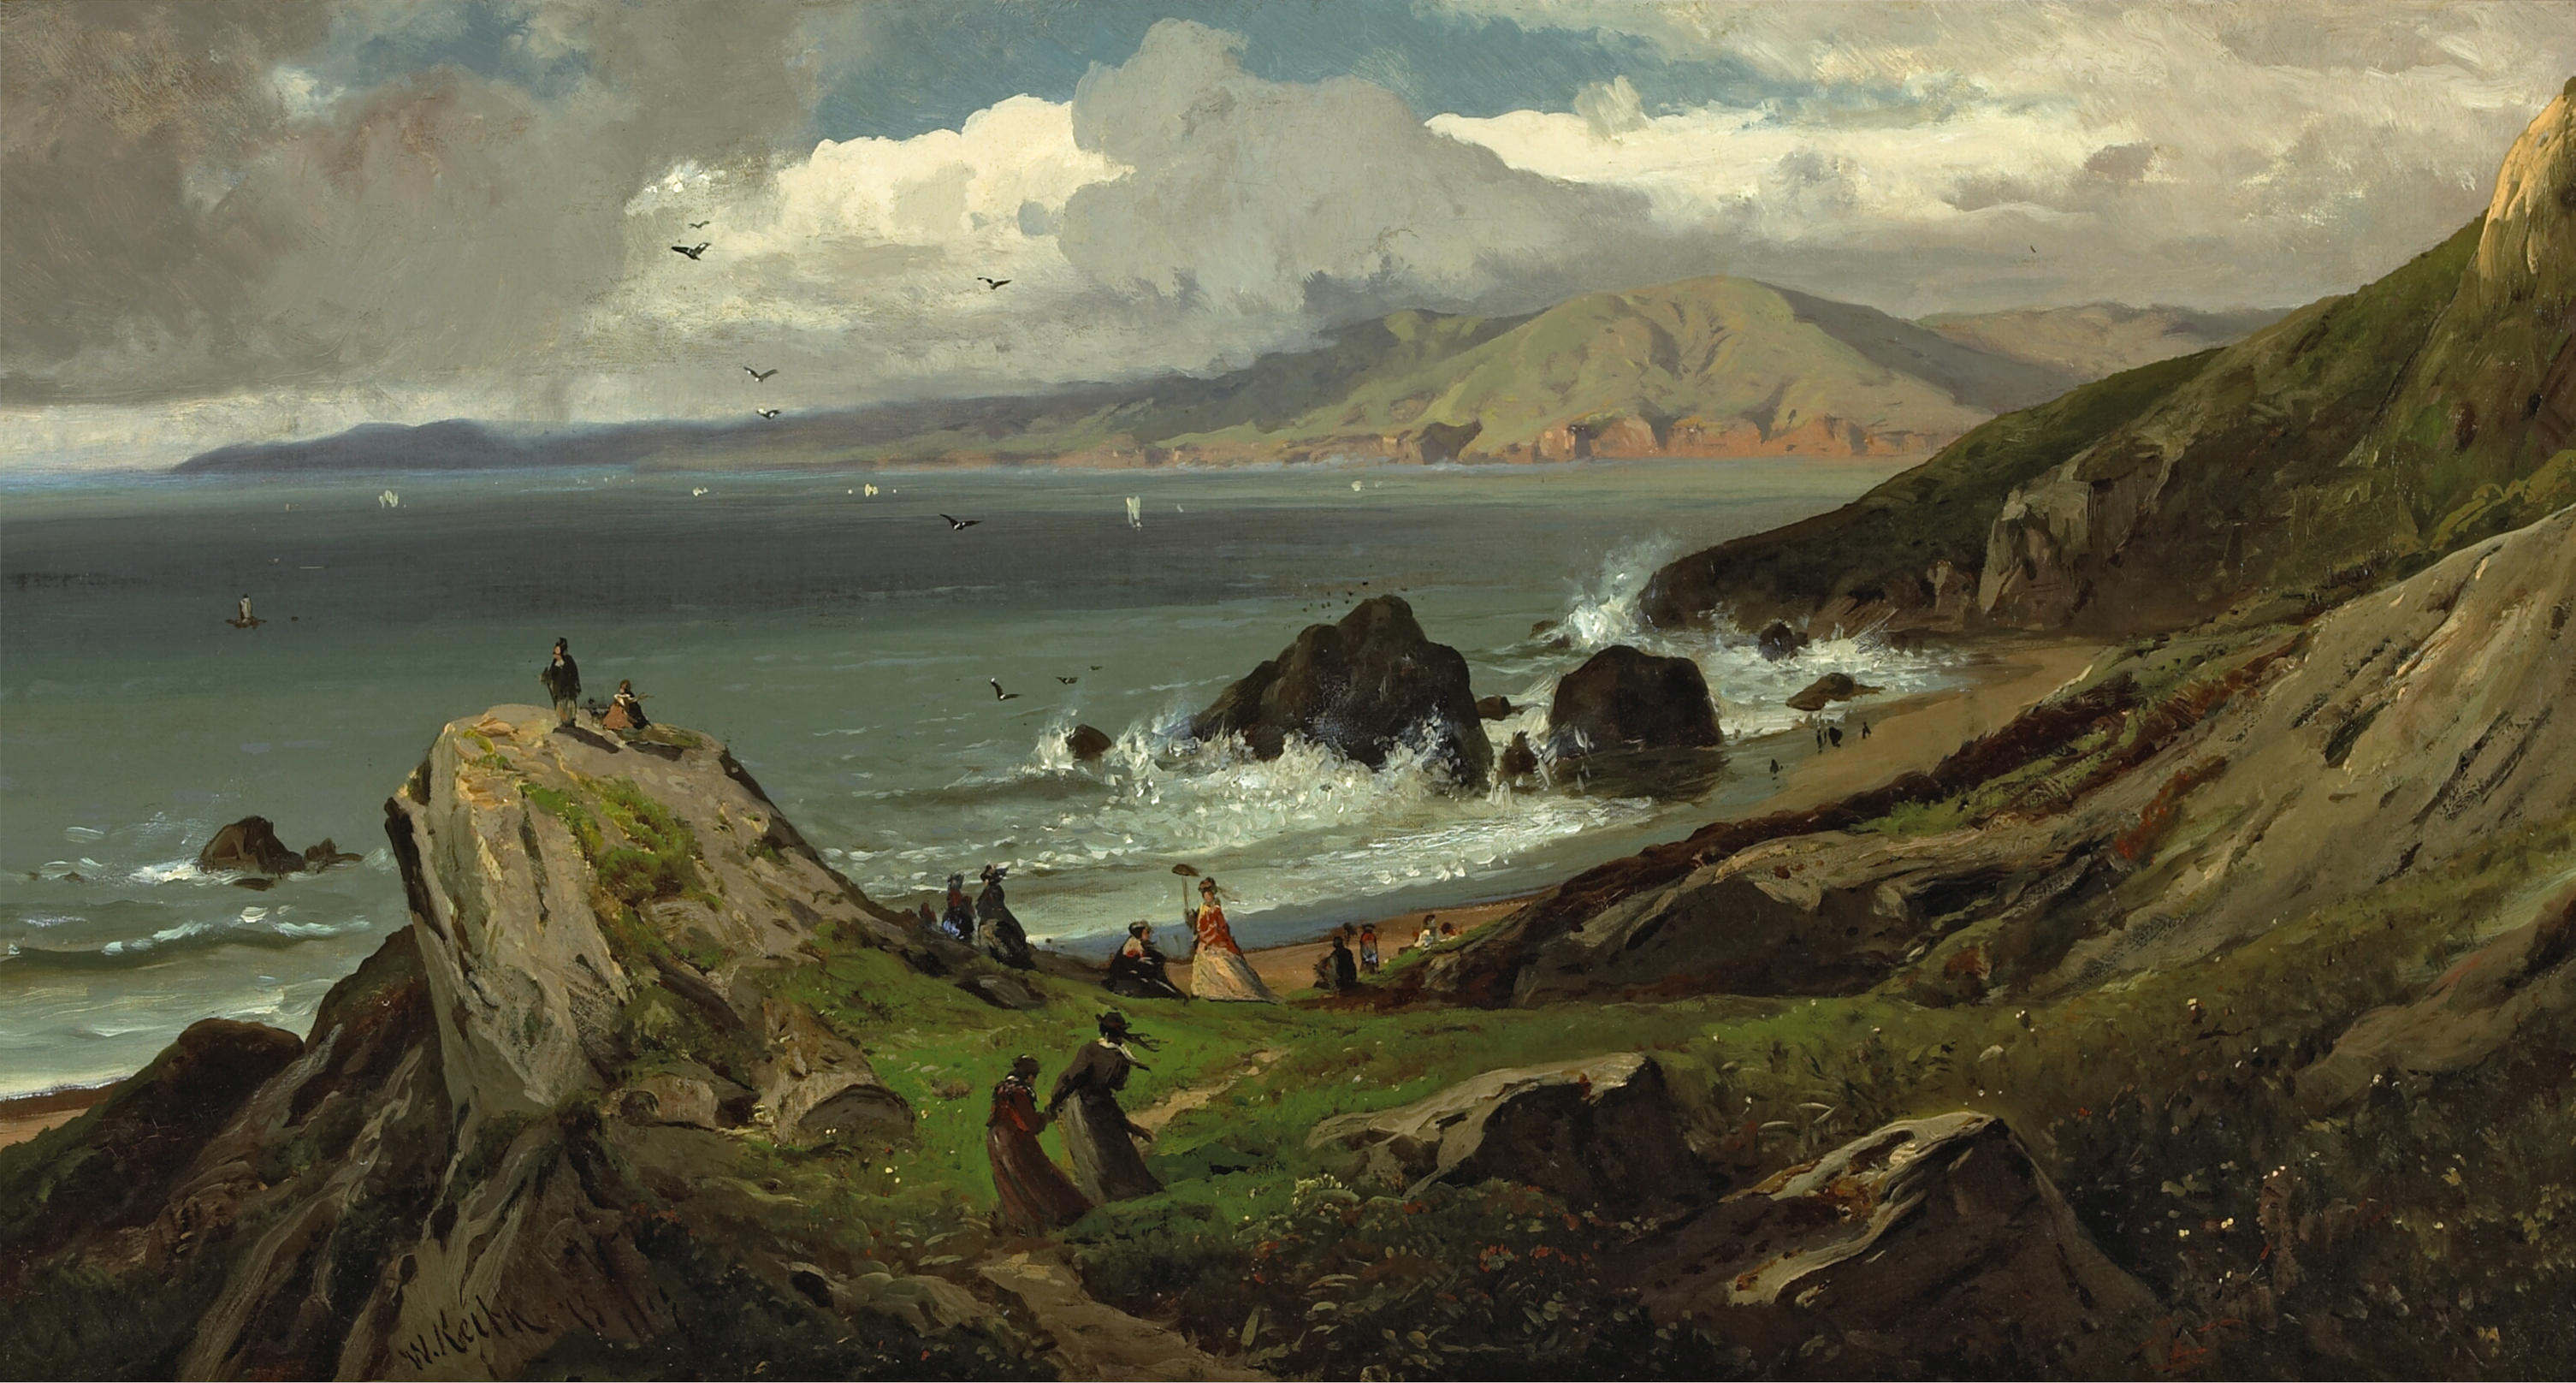 Land's End by William Keith, 1873